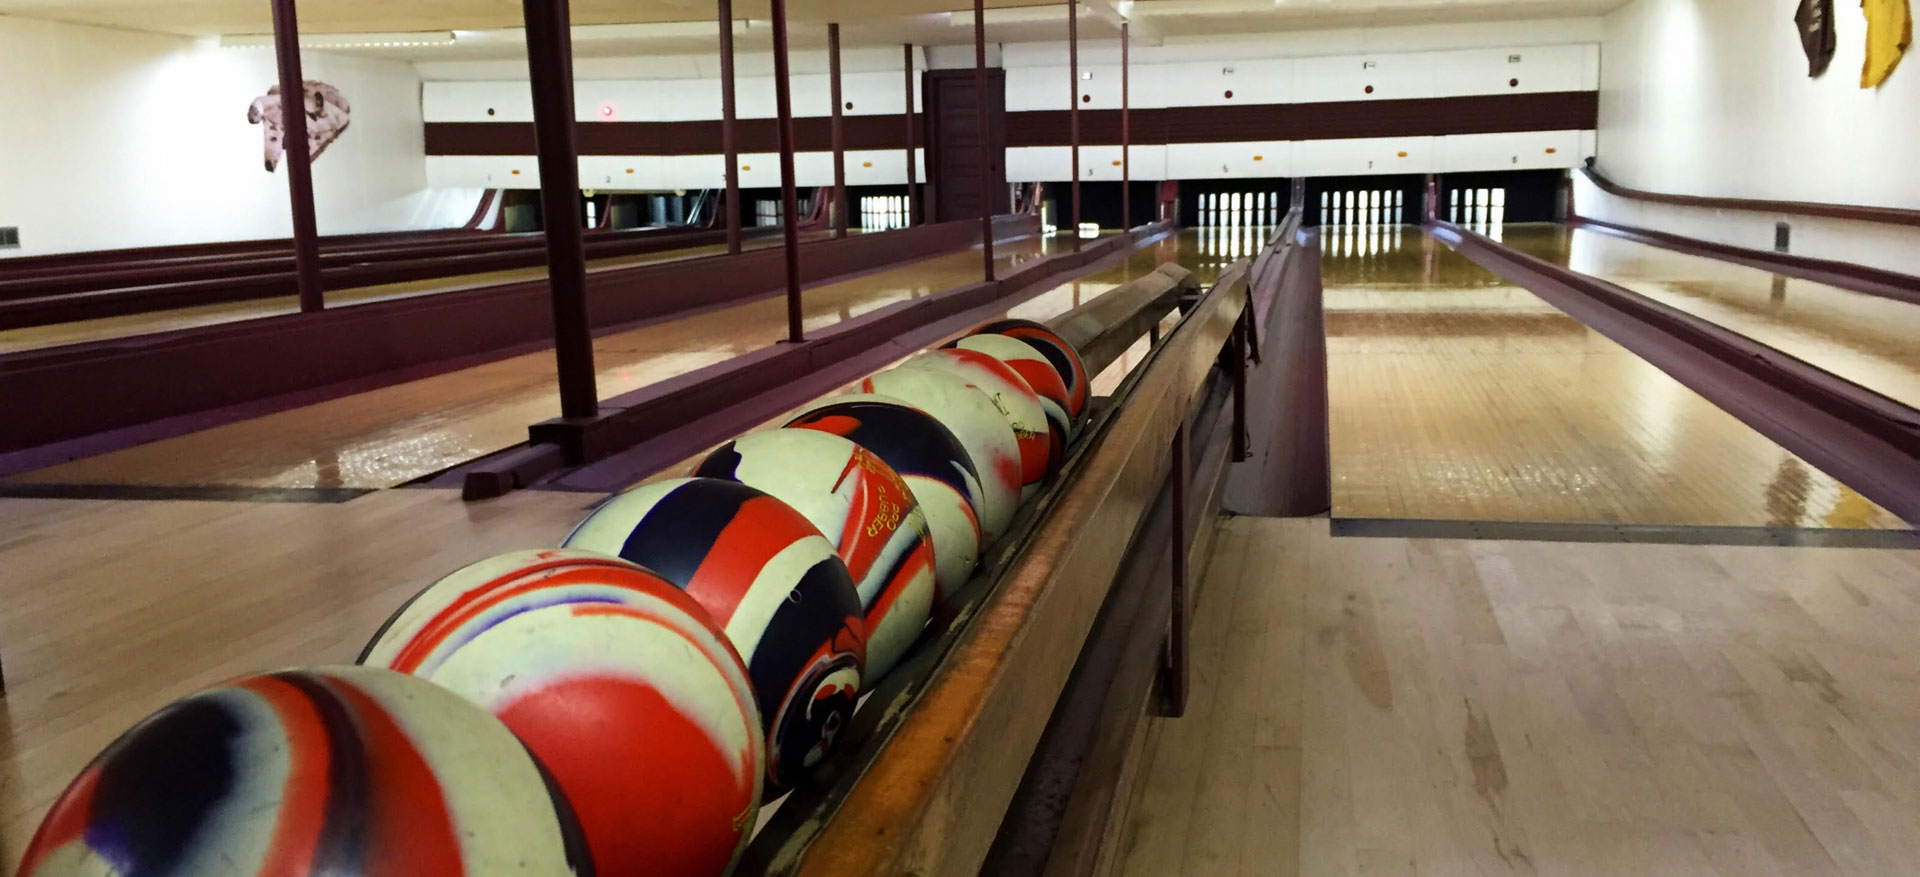 Welcome To One Of The Oldest Bowling Alleys In The Country Shelburne